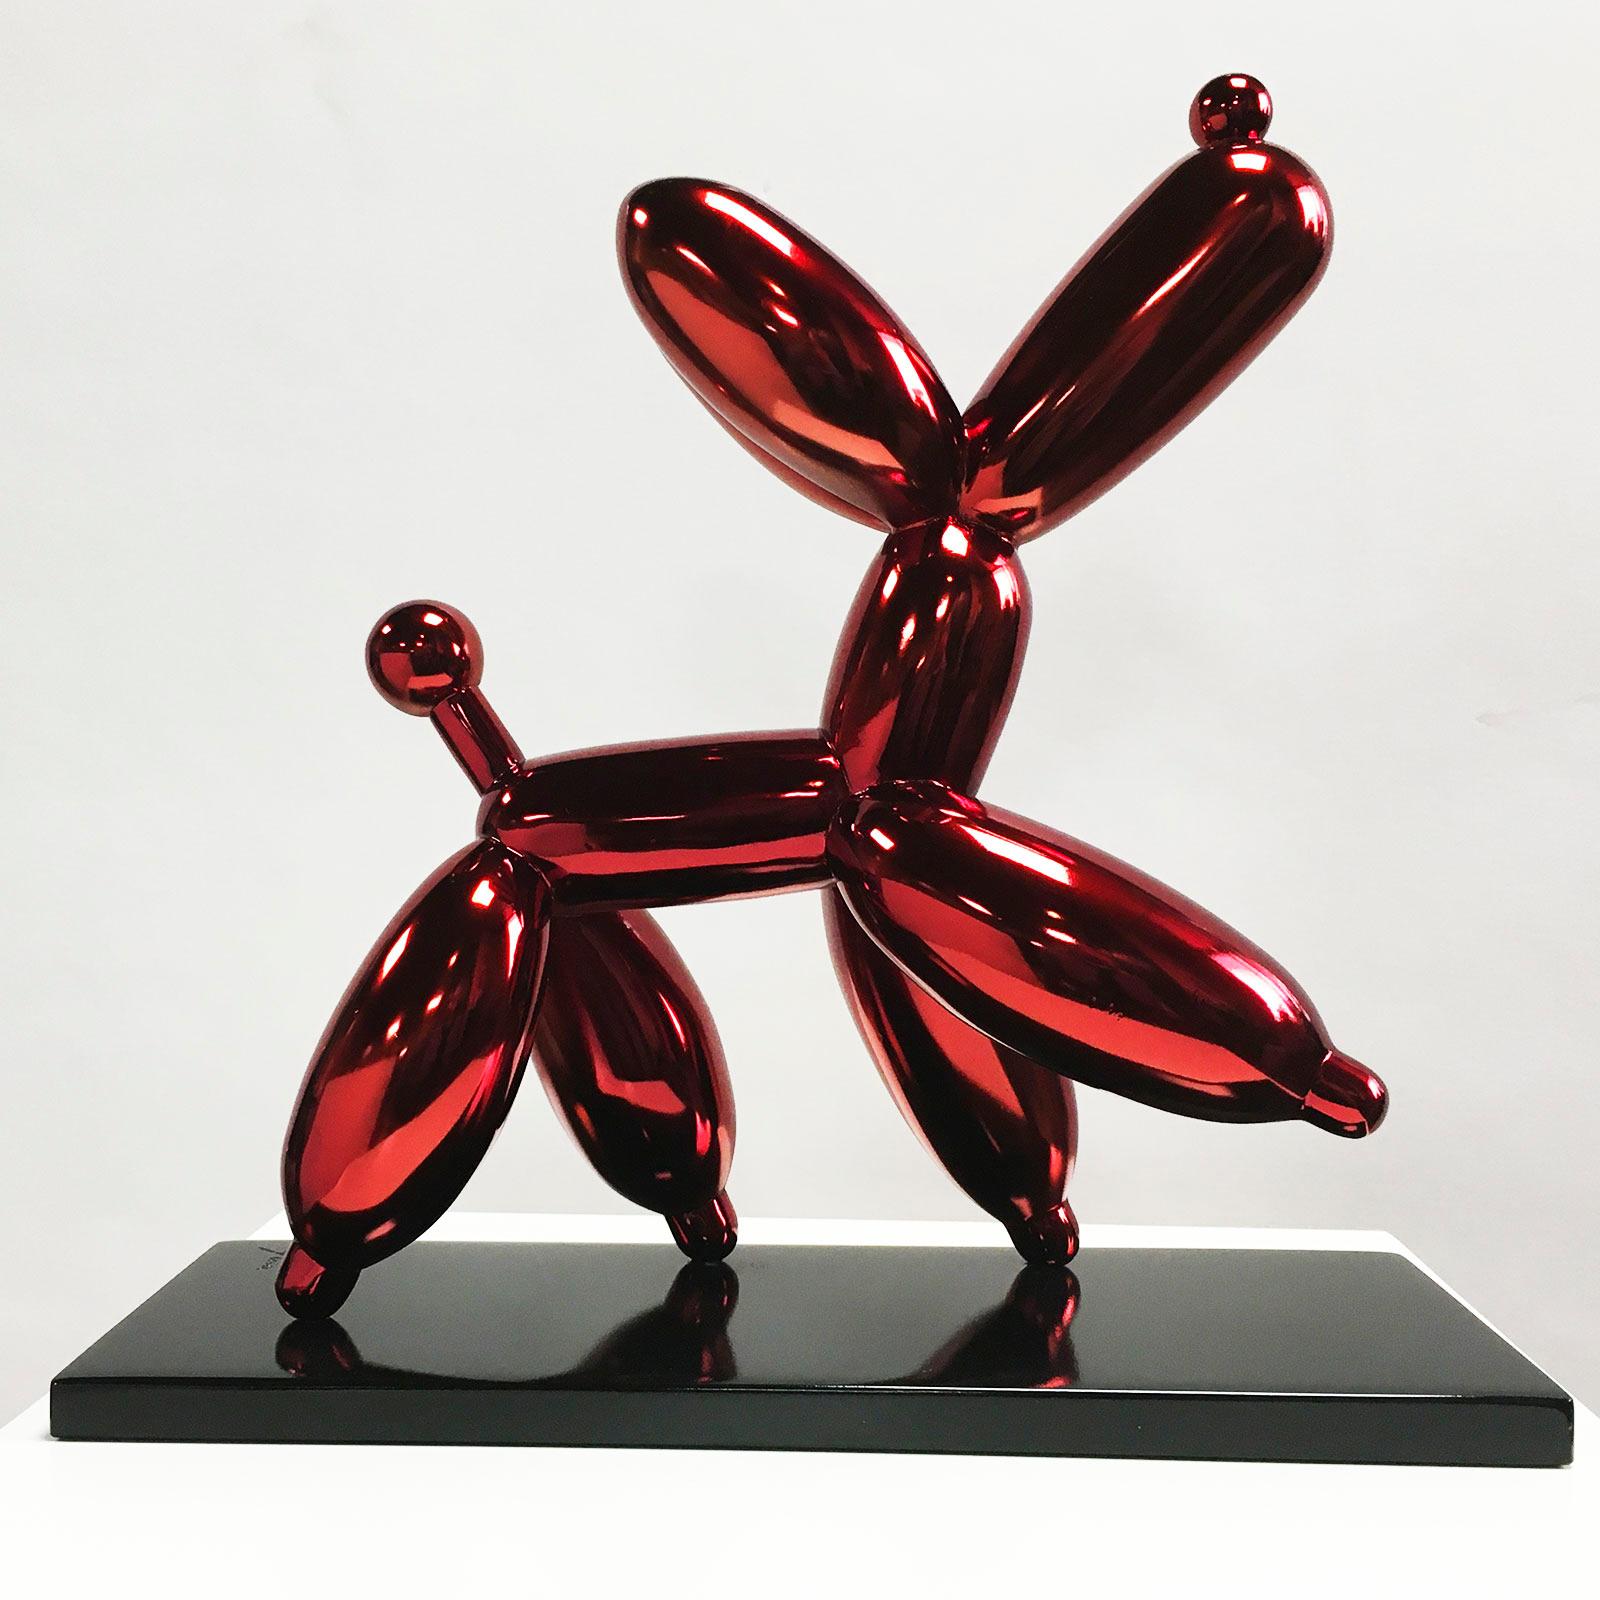 To receive this sculpture you have to indicate the color of the finish between Blue, Red and Nickel.

Pop Art Sculpture "Smug dog" by Miguel Guía.
The sculpture is made of a layer of nickel on cold smelting of copper with the base of graphite or